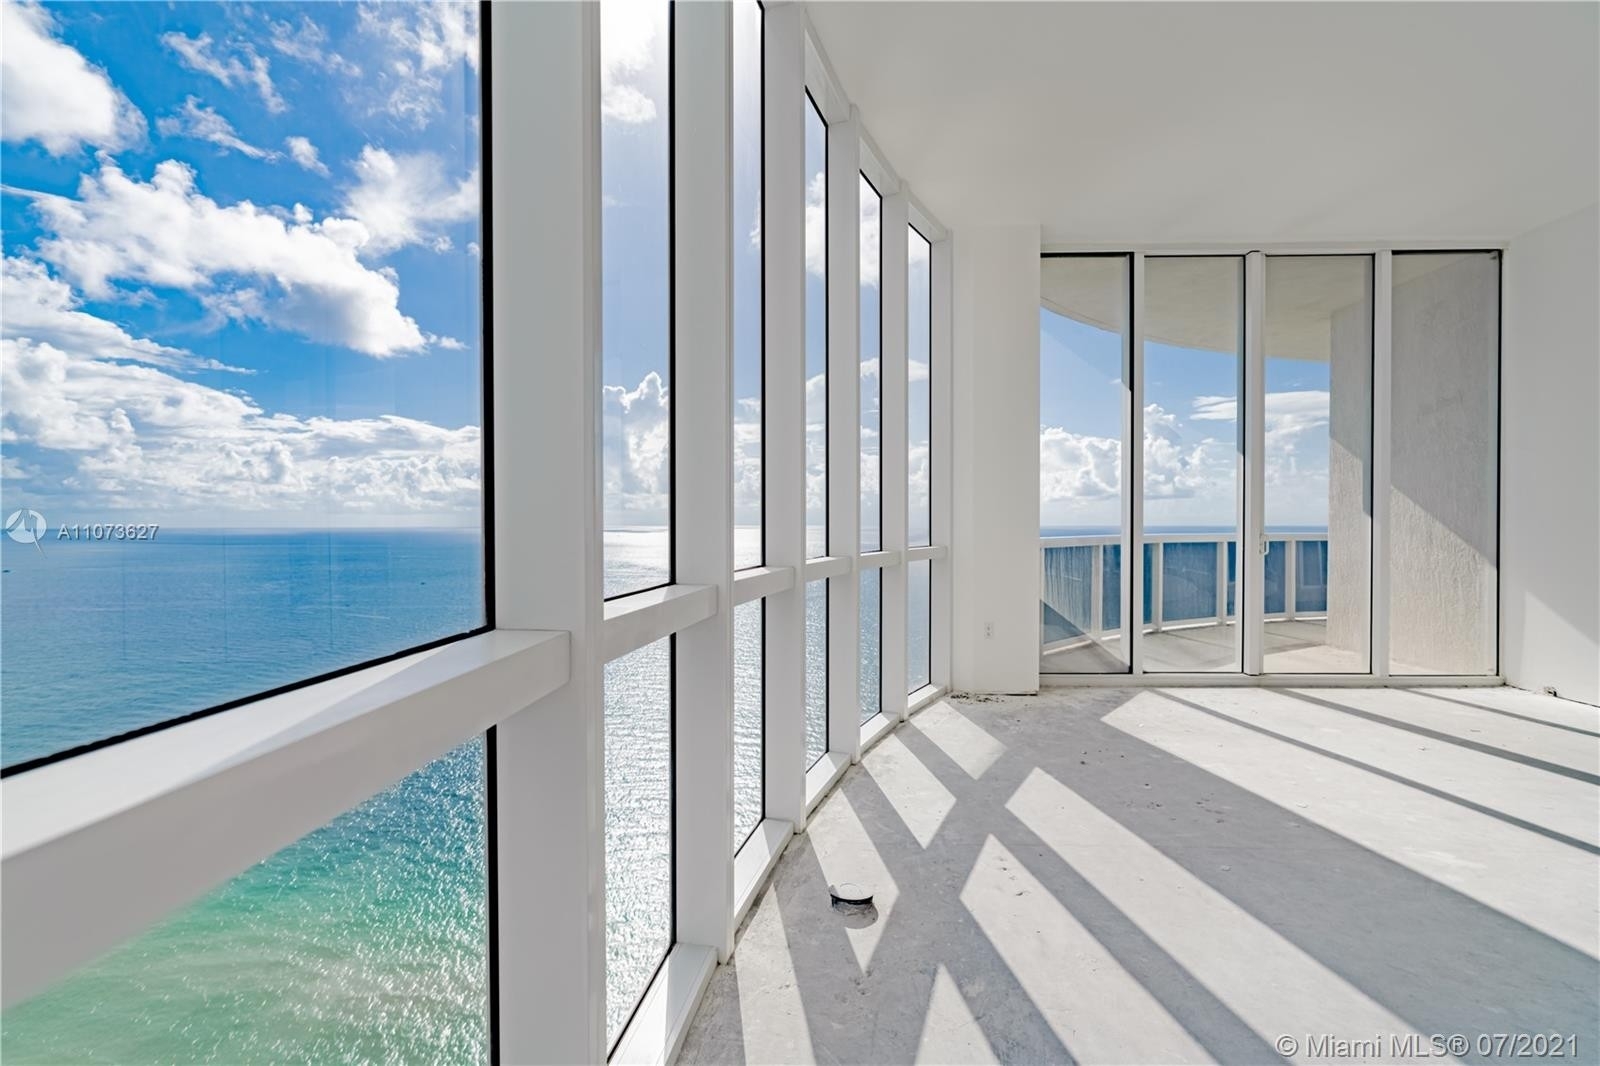 16. Condominiums for Sale at 15811 Collins Ave , 4001 Sunny Isles Beach, FL 33160